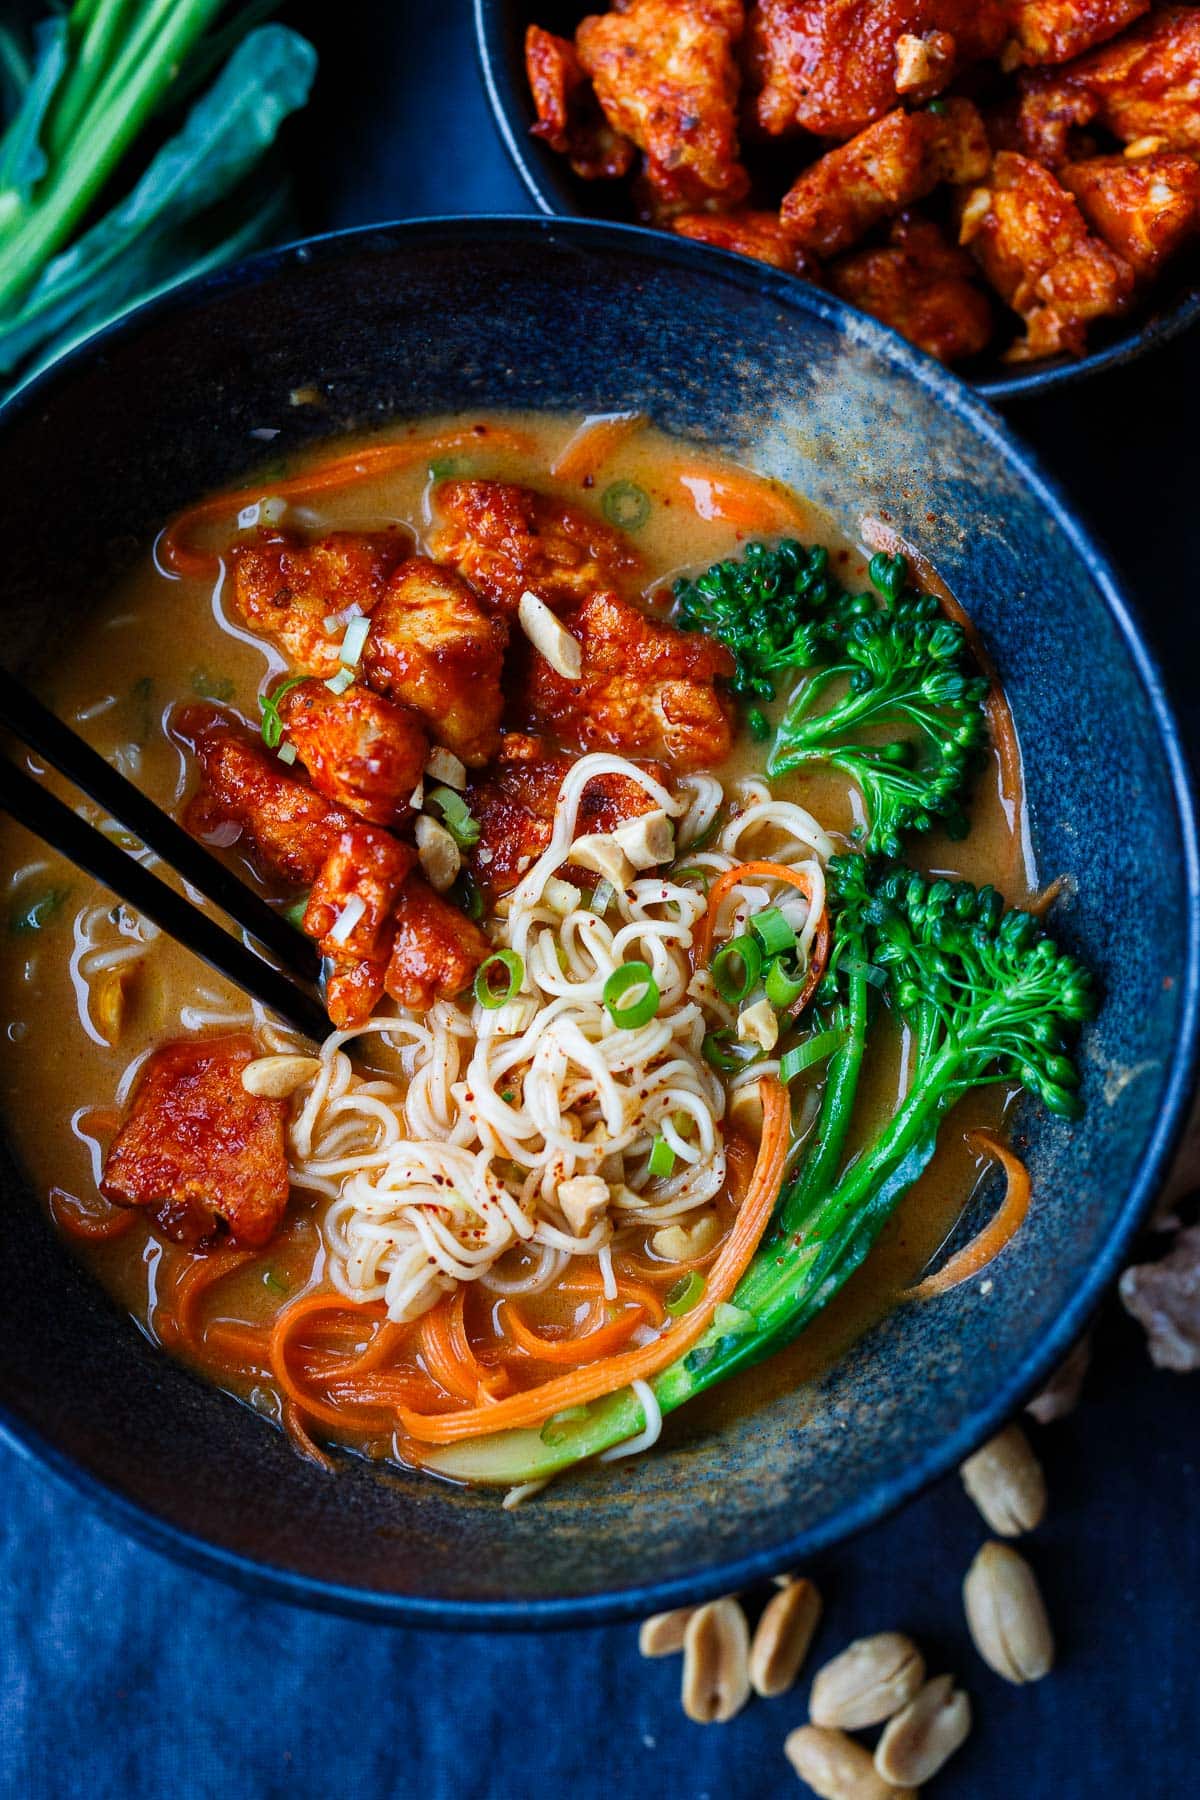 bowl of peanut butter ramen with noodles, topped with crispy Korean tofu, broccolini, carrots, peanuts, green onions.